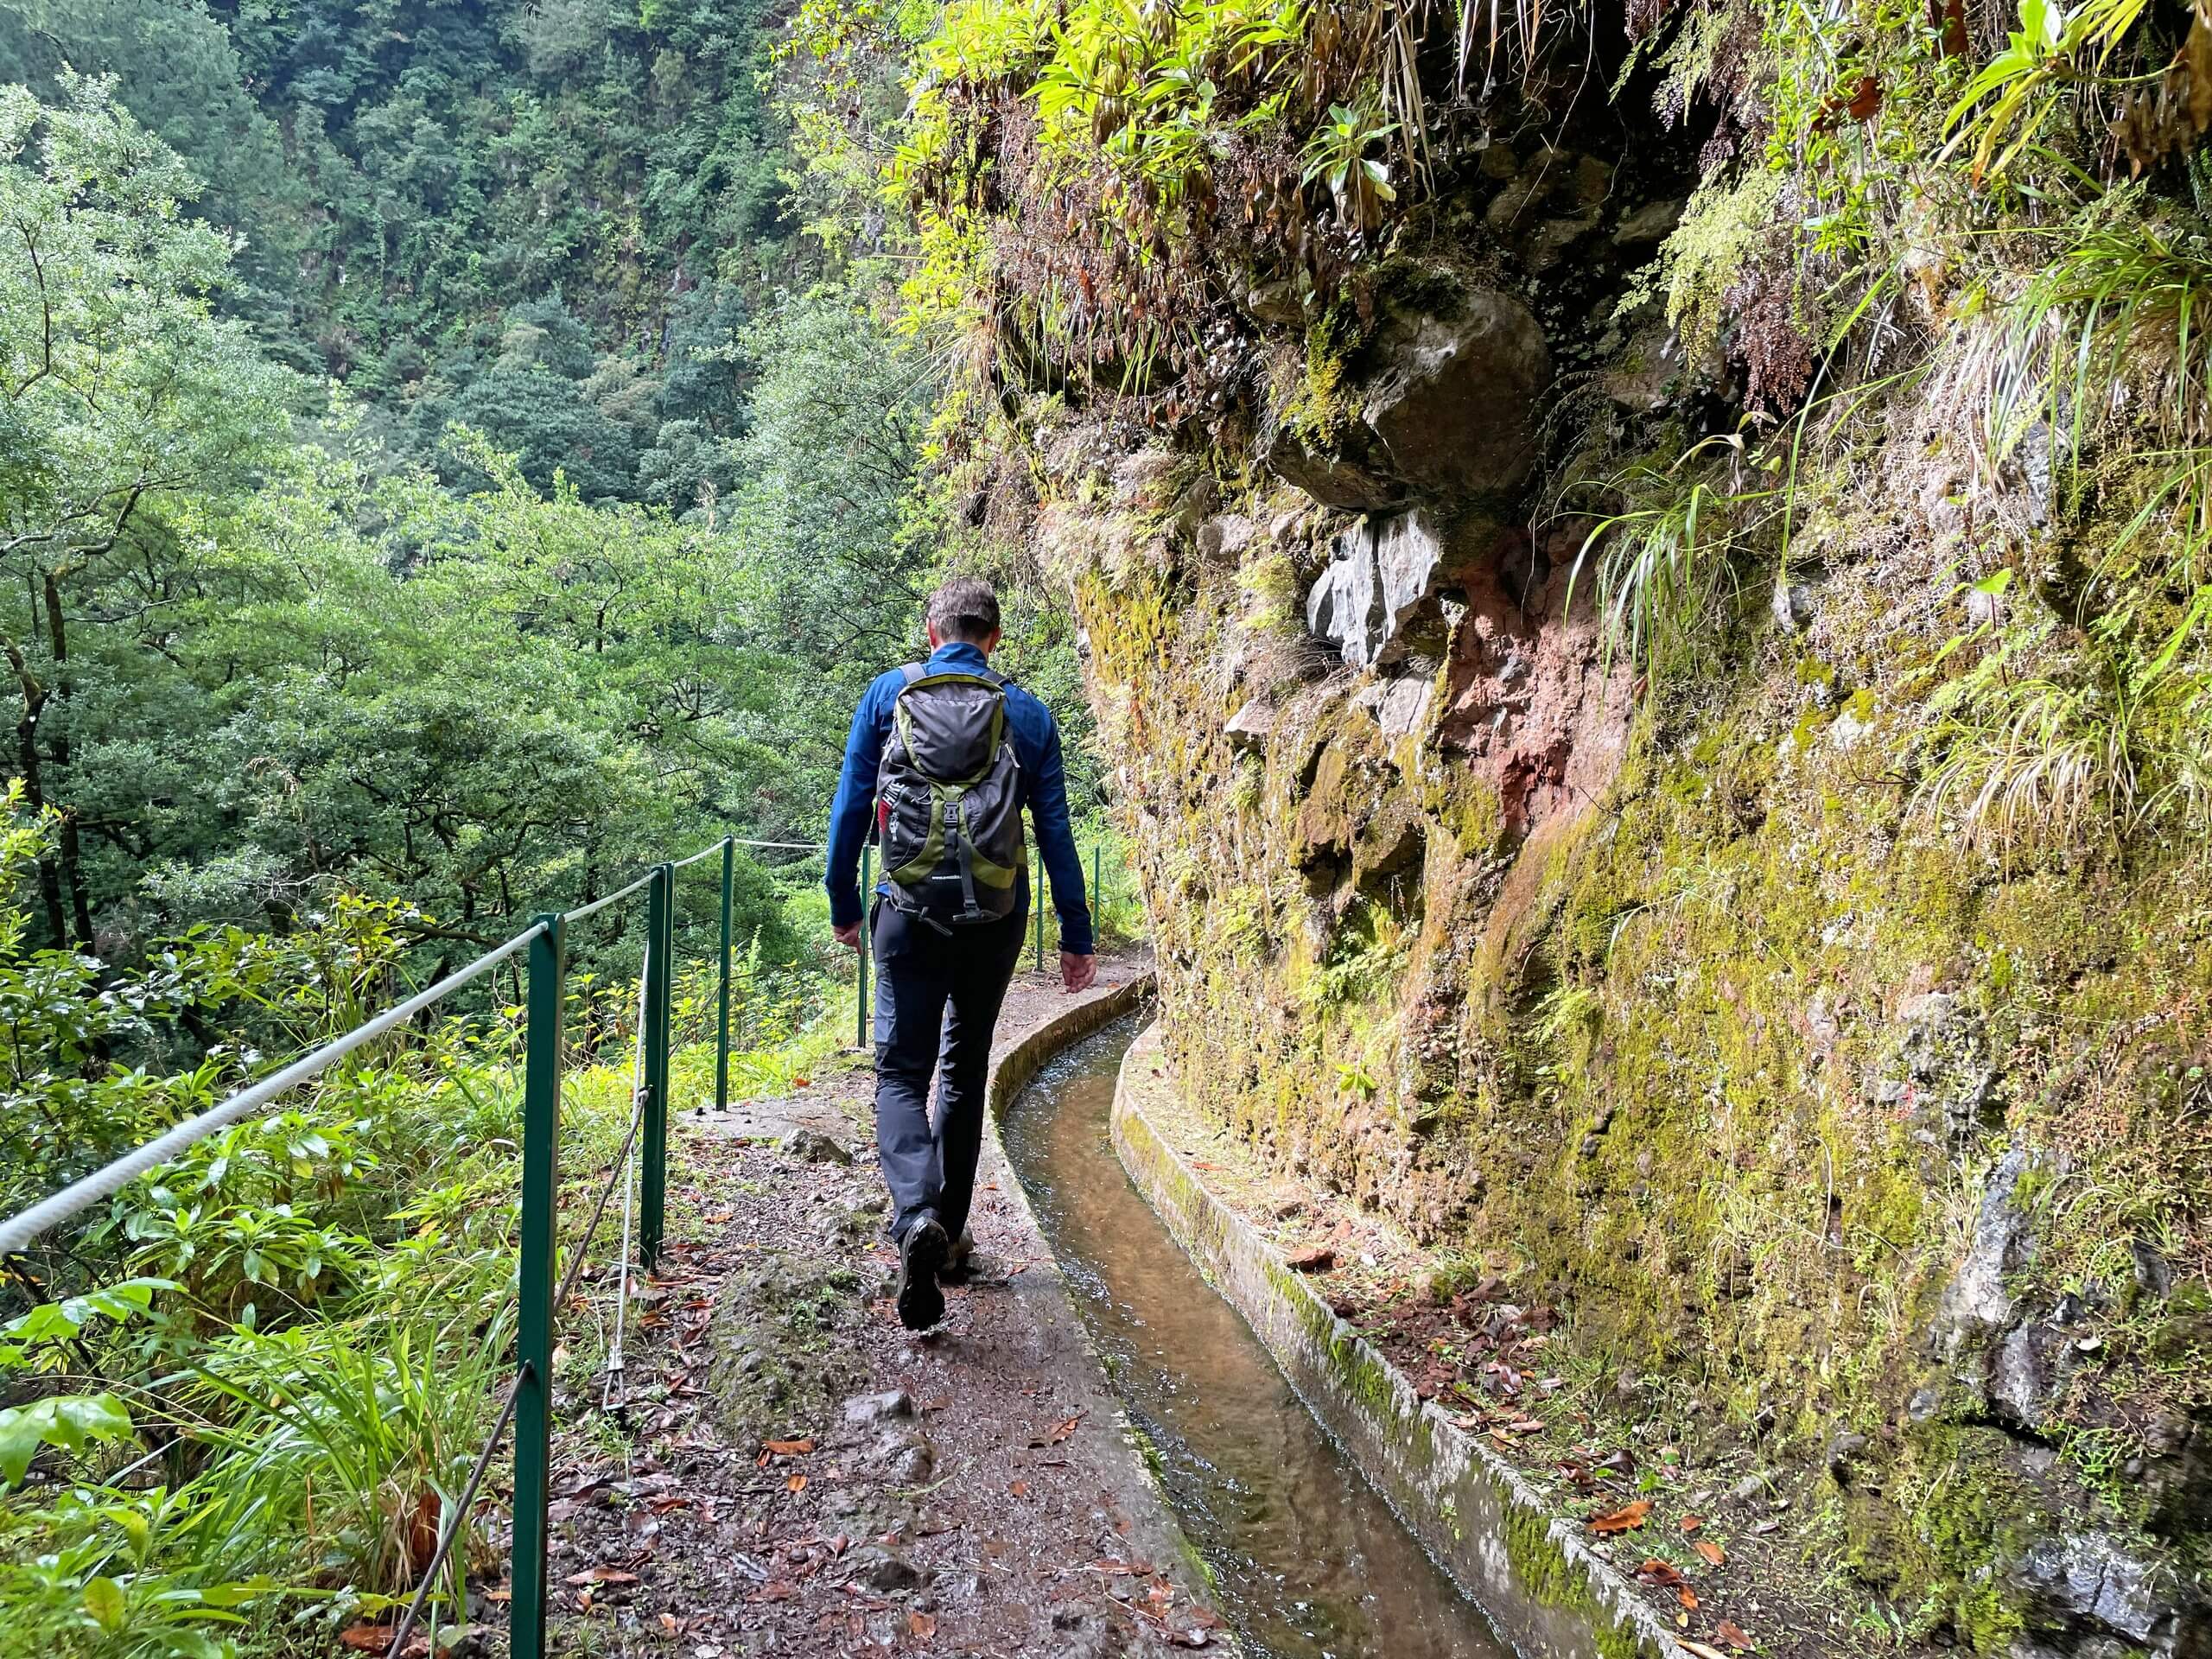 Walking along the drainage in Madeira Island